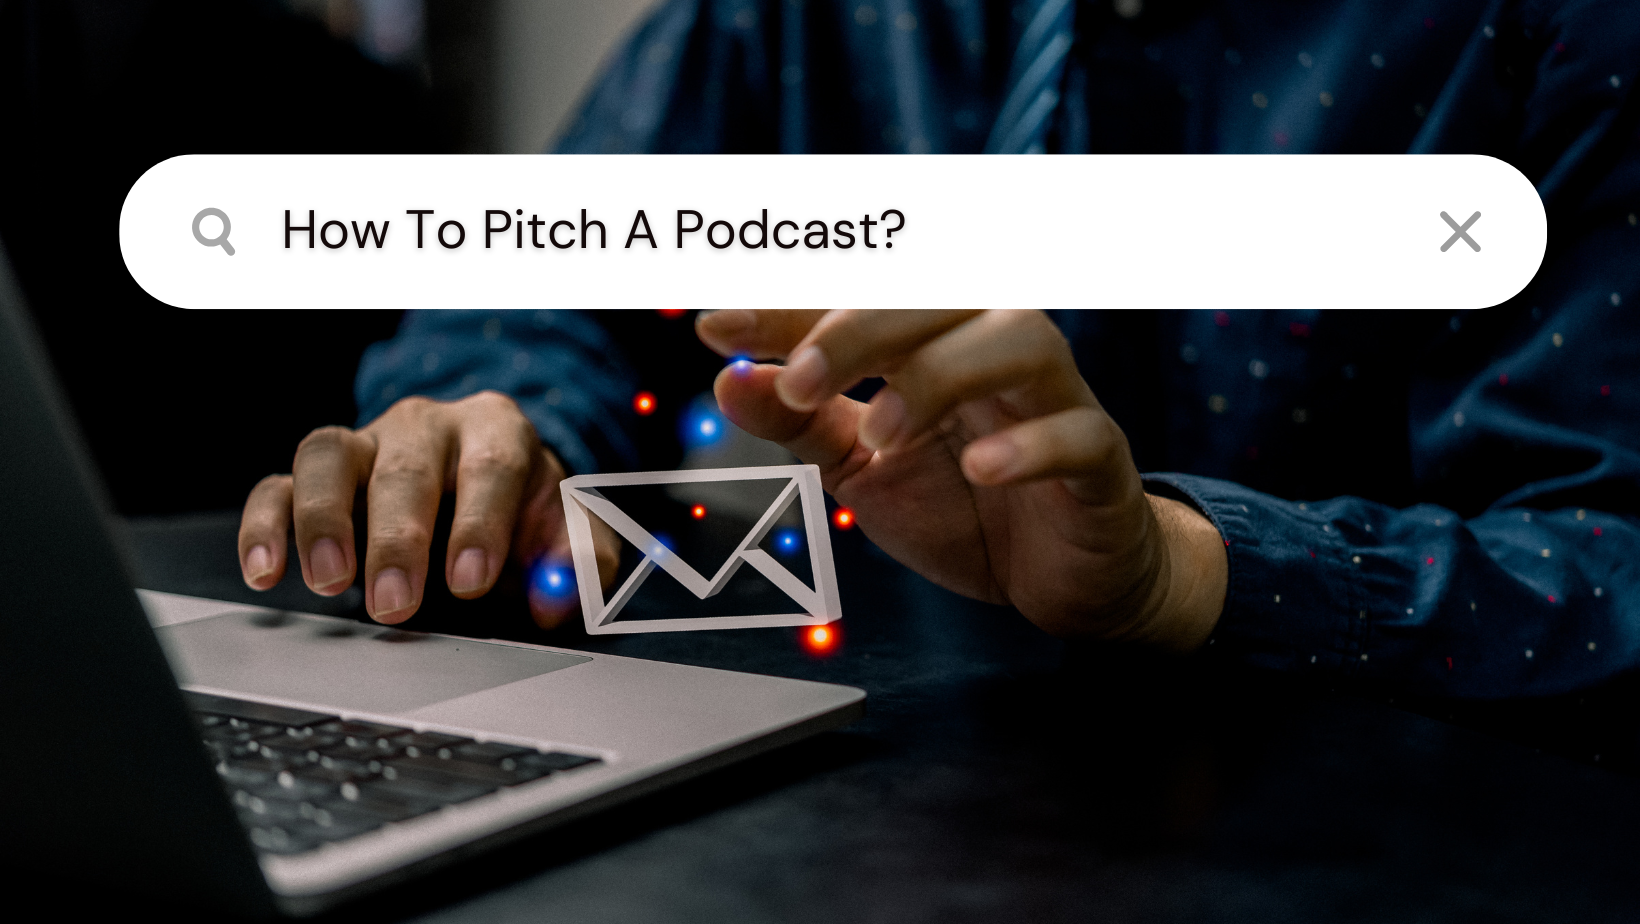 How To Pitch A Podcast?